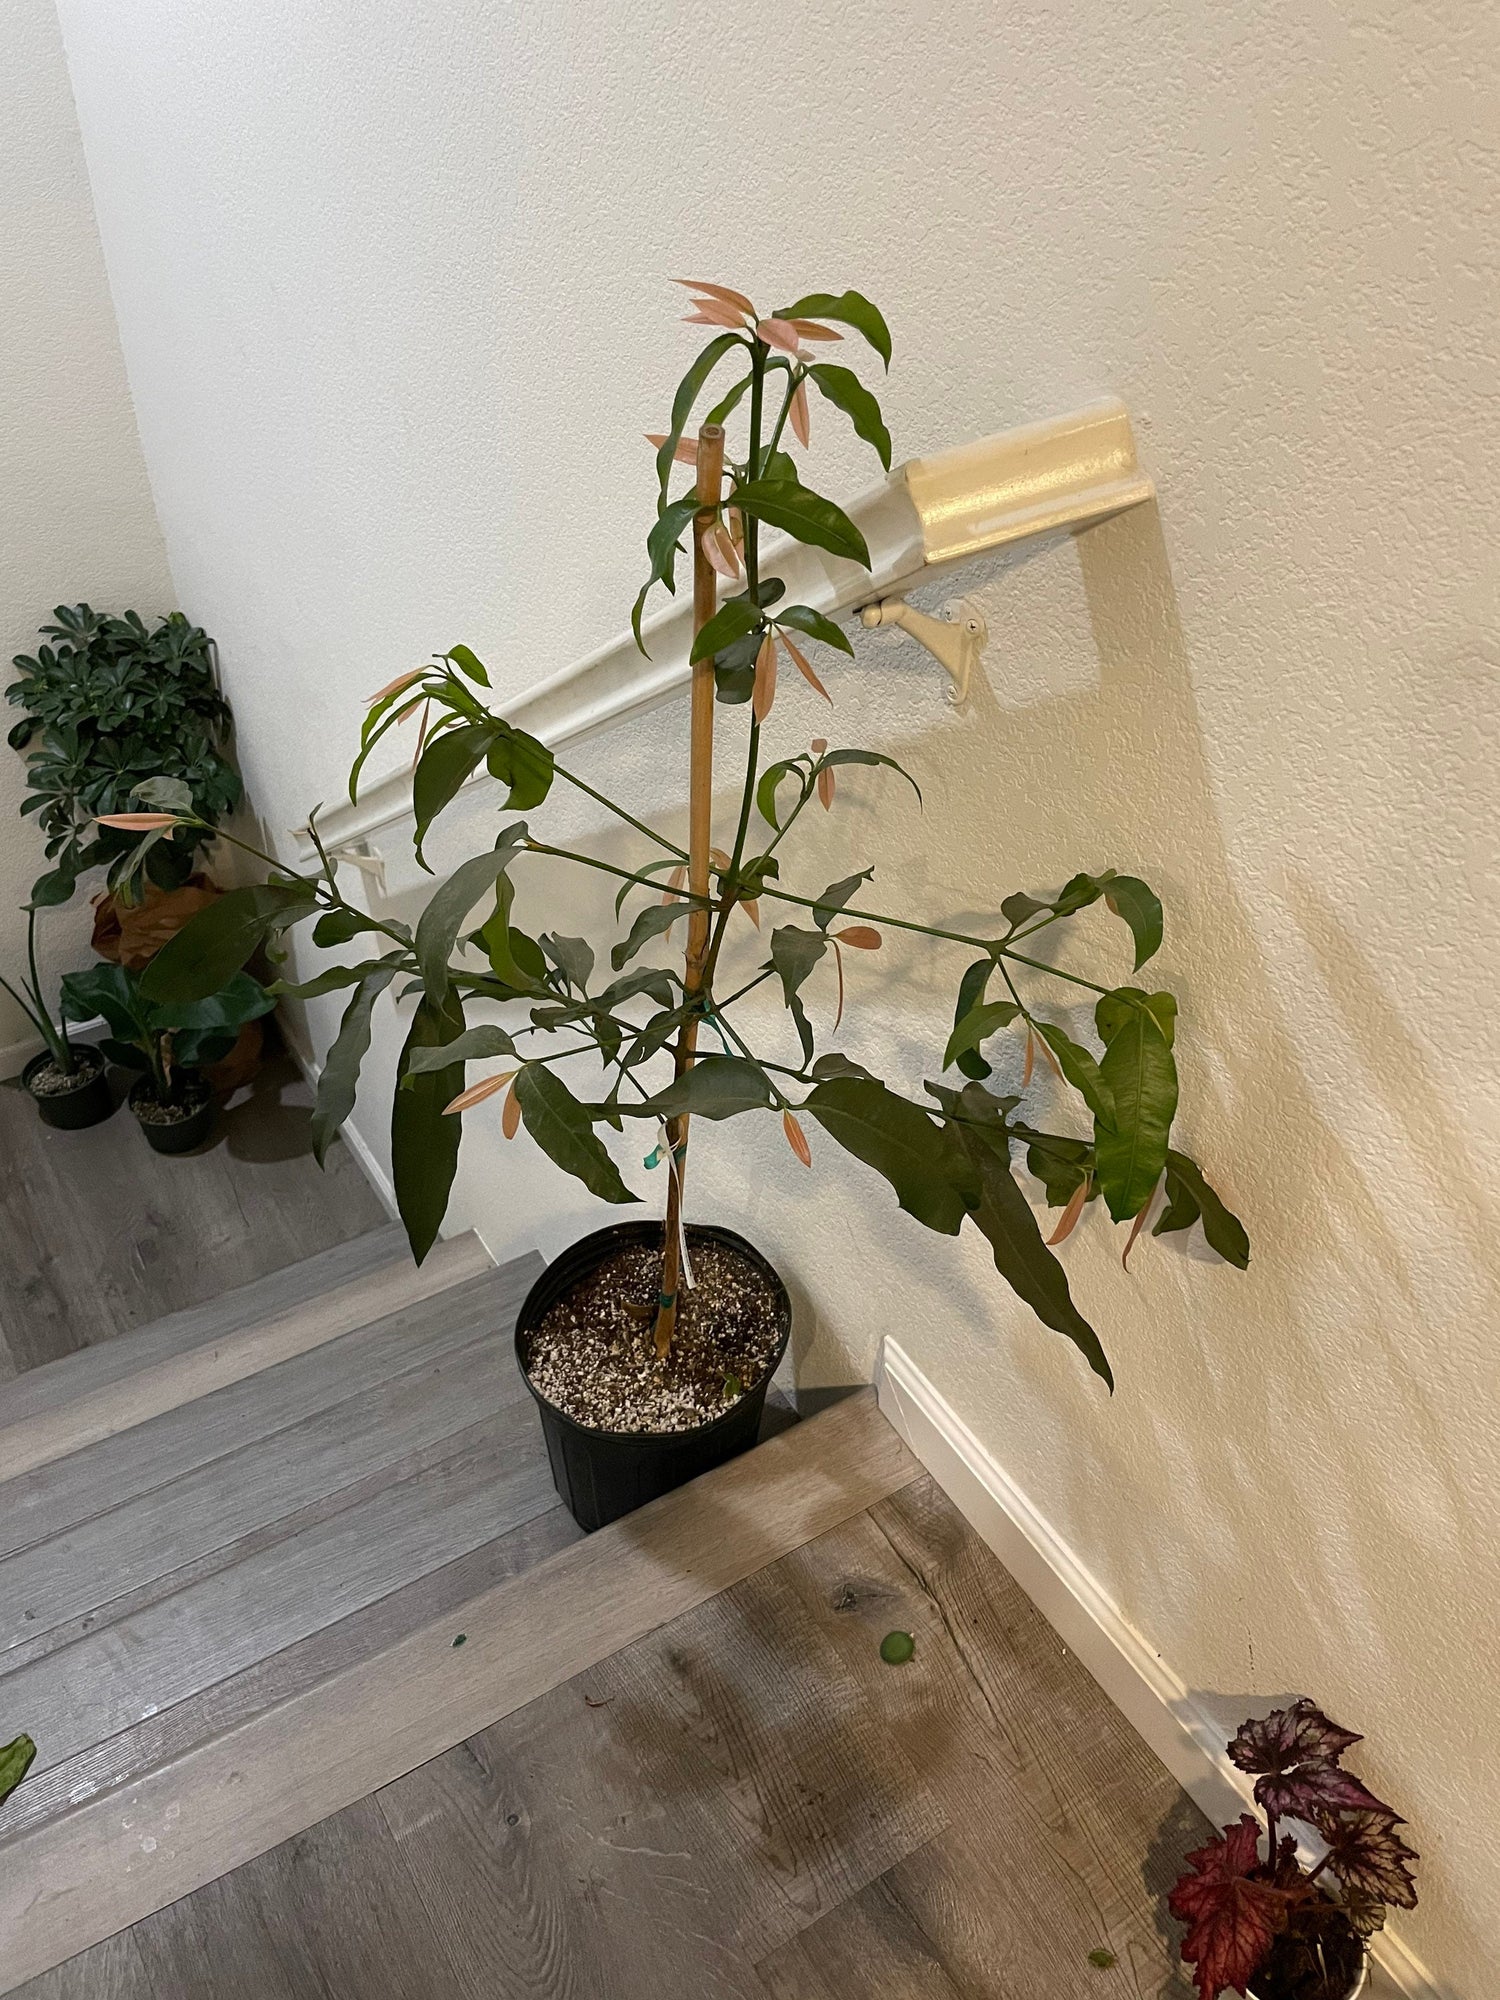 3 gallon potted exotic fruit -Garcinia humilis,achachairú ,achacha -3ft to 4ft tall tree-similar to mangosteen